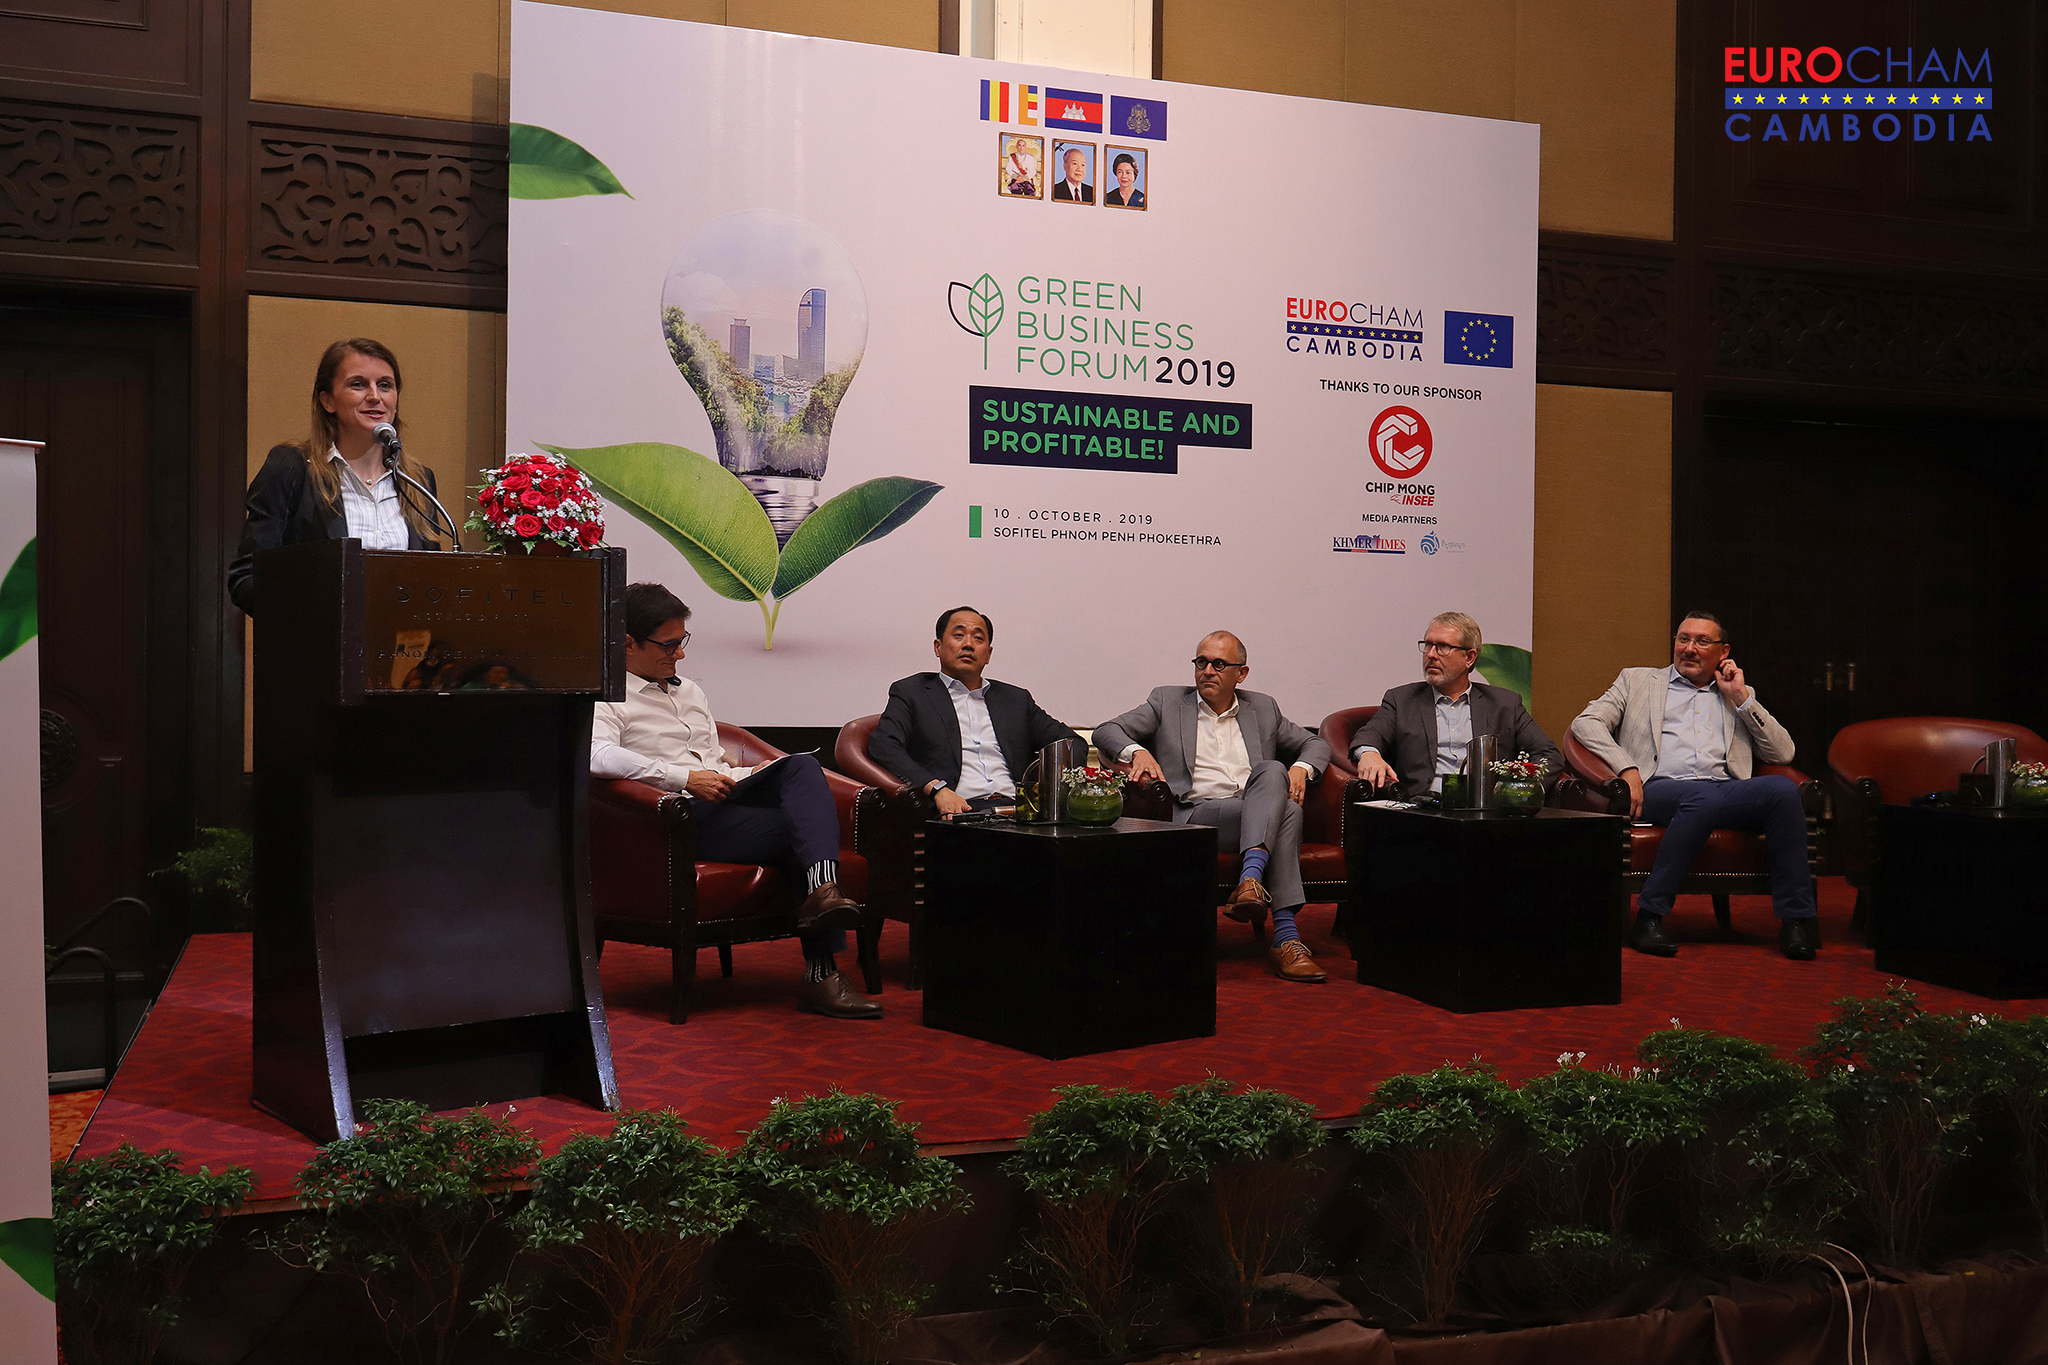 BEE Spreads Green Building Knowledge in Cambodia at EuroCHAM’s Green Business Forum 2019